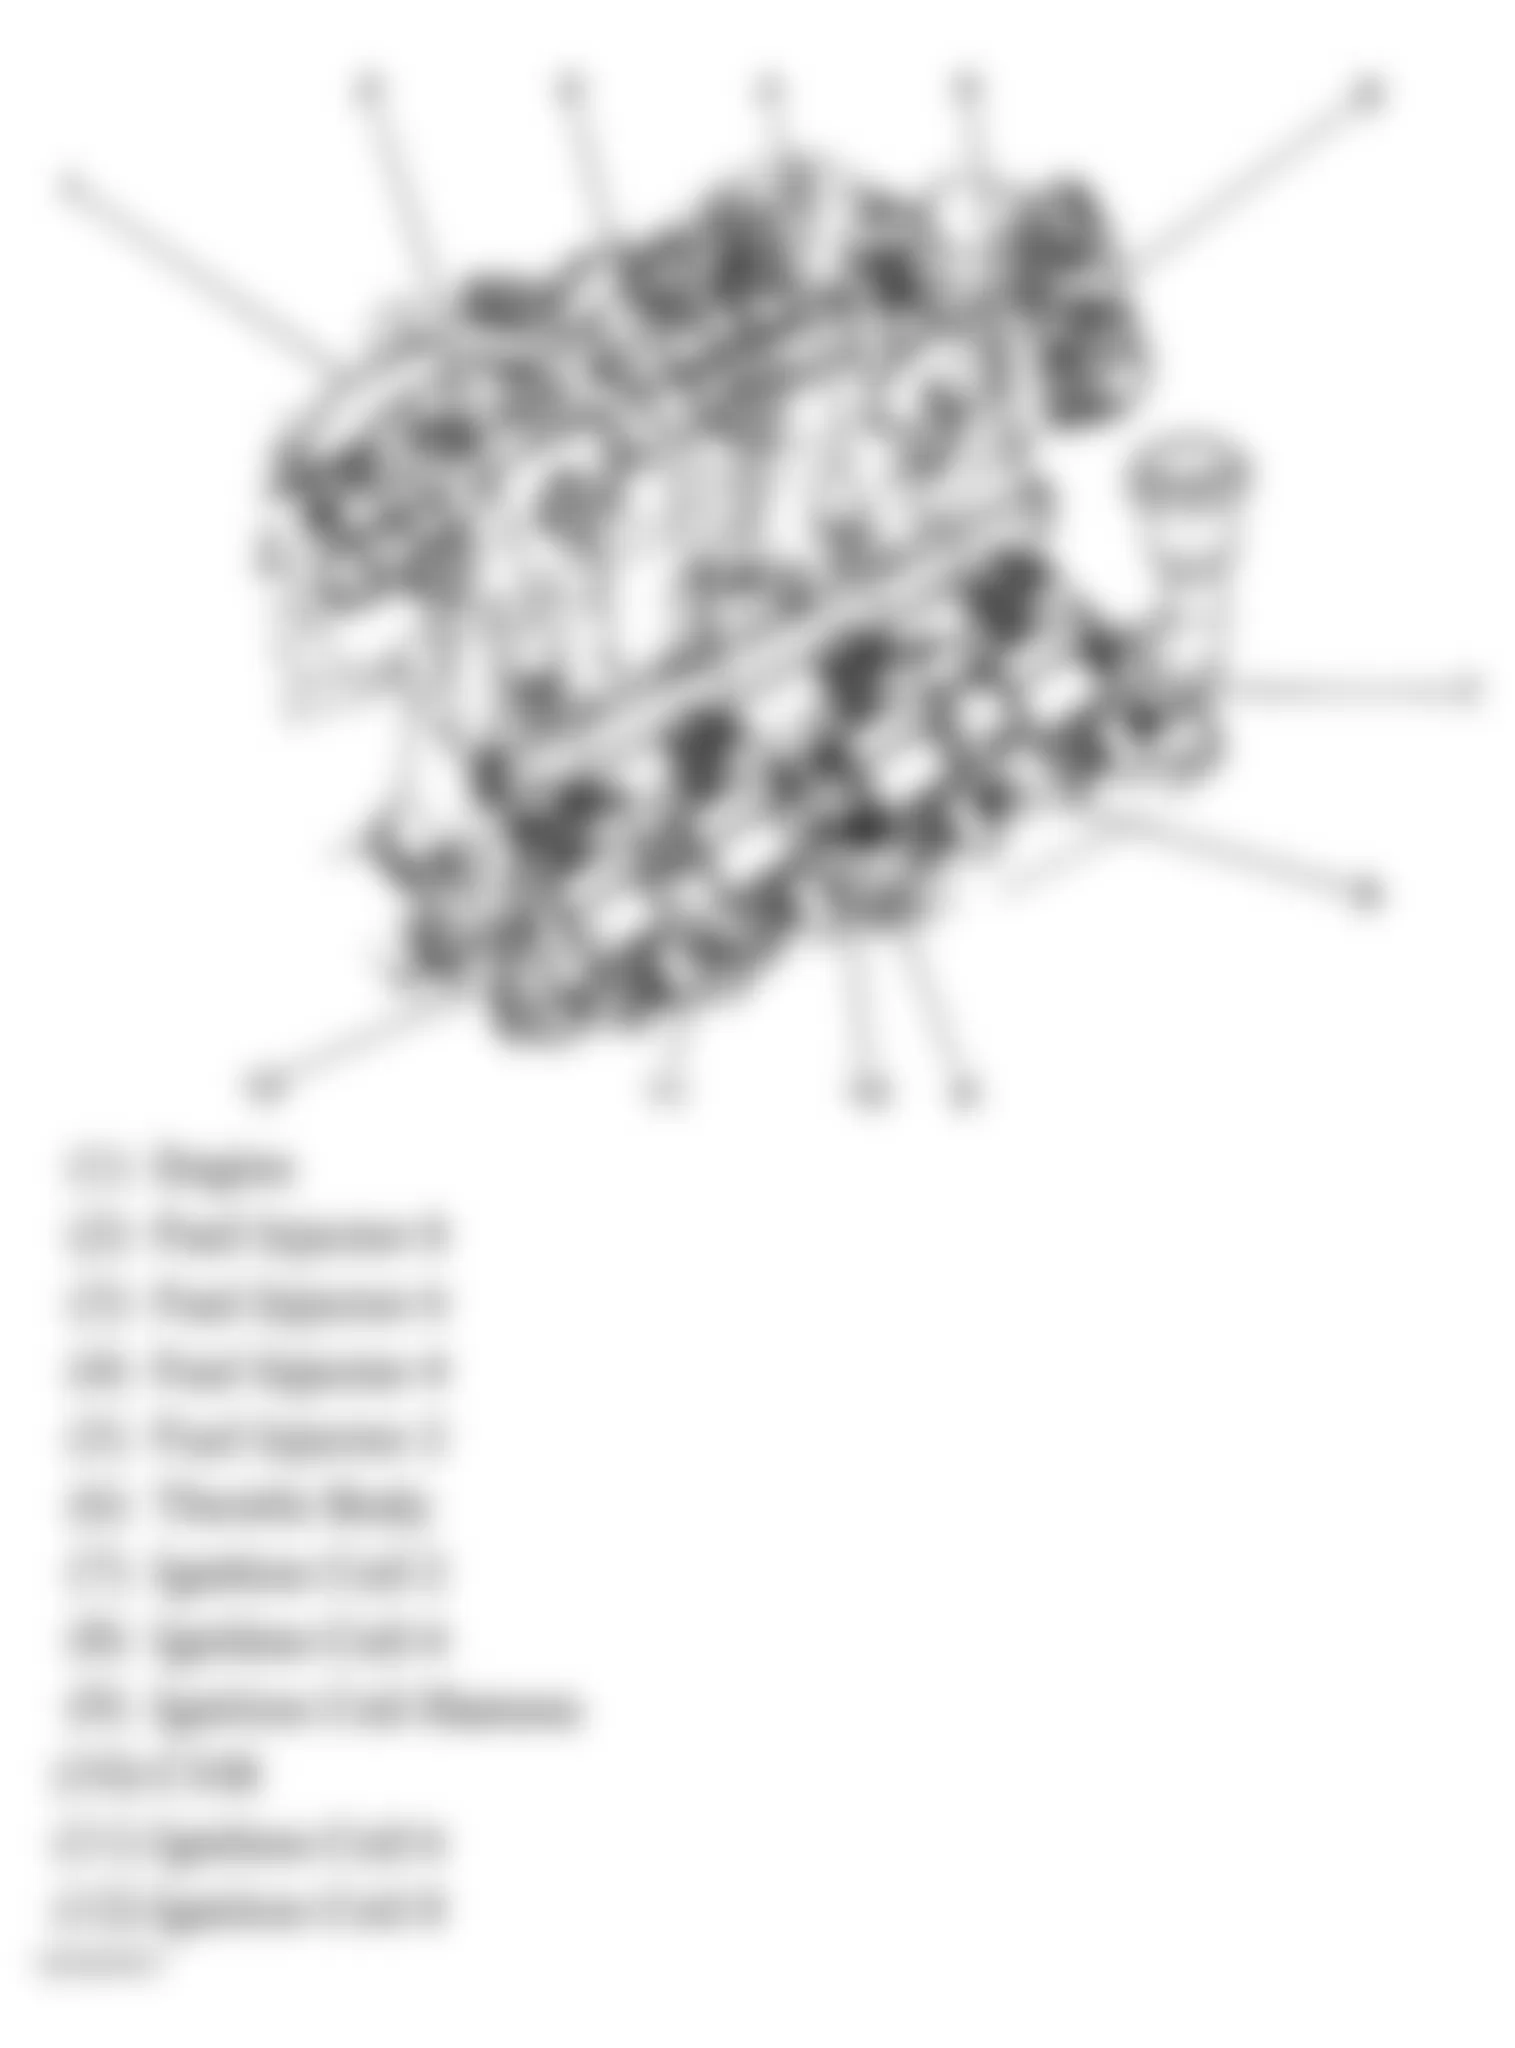 GMC Envoy 2007 - Component Locations -  Upper Right Side Of Engine (5.3L/6.0L)